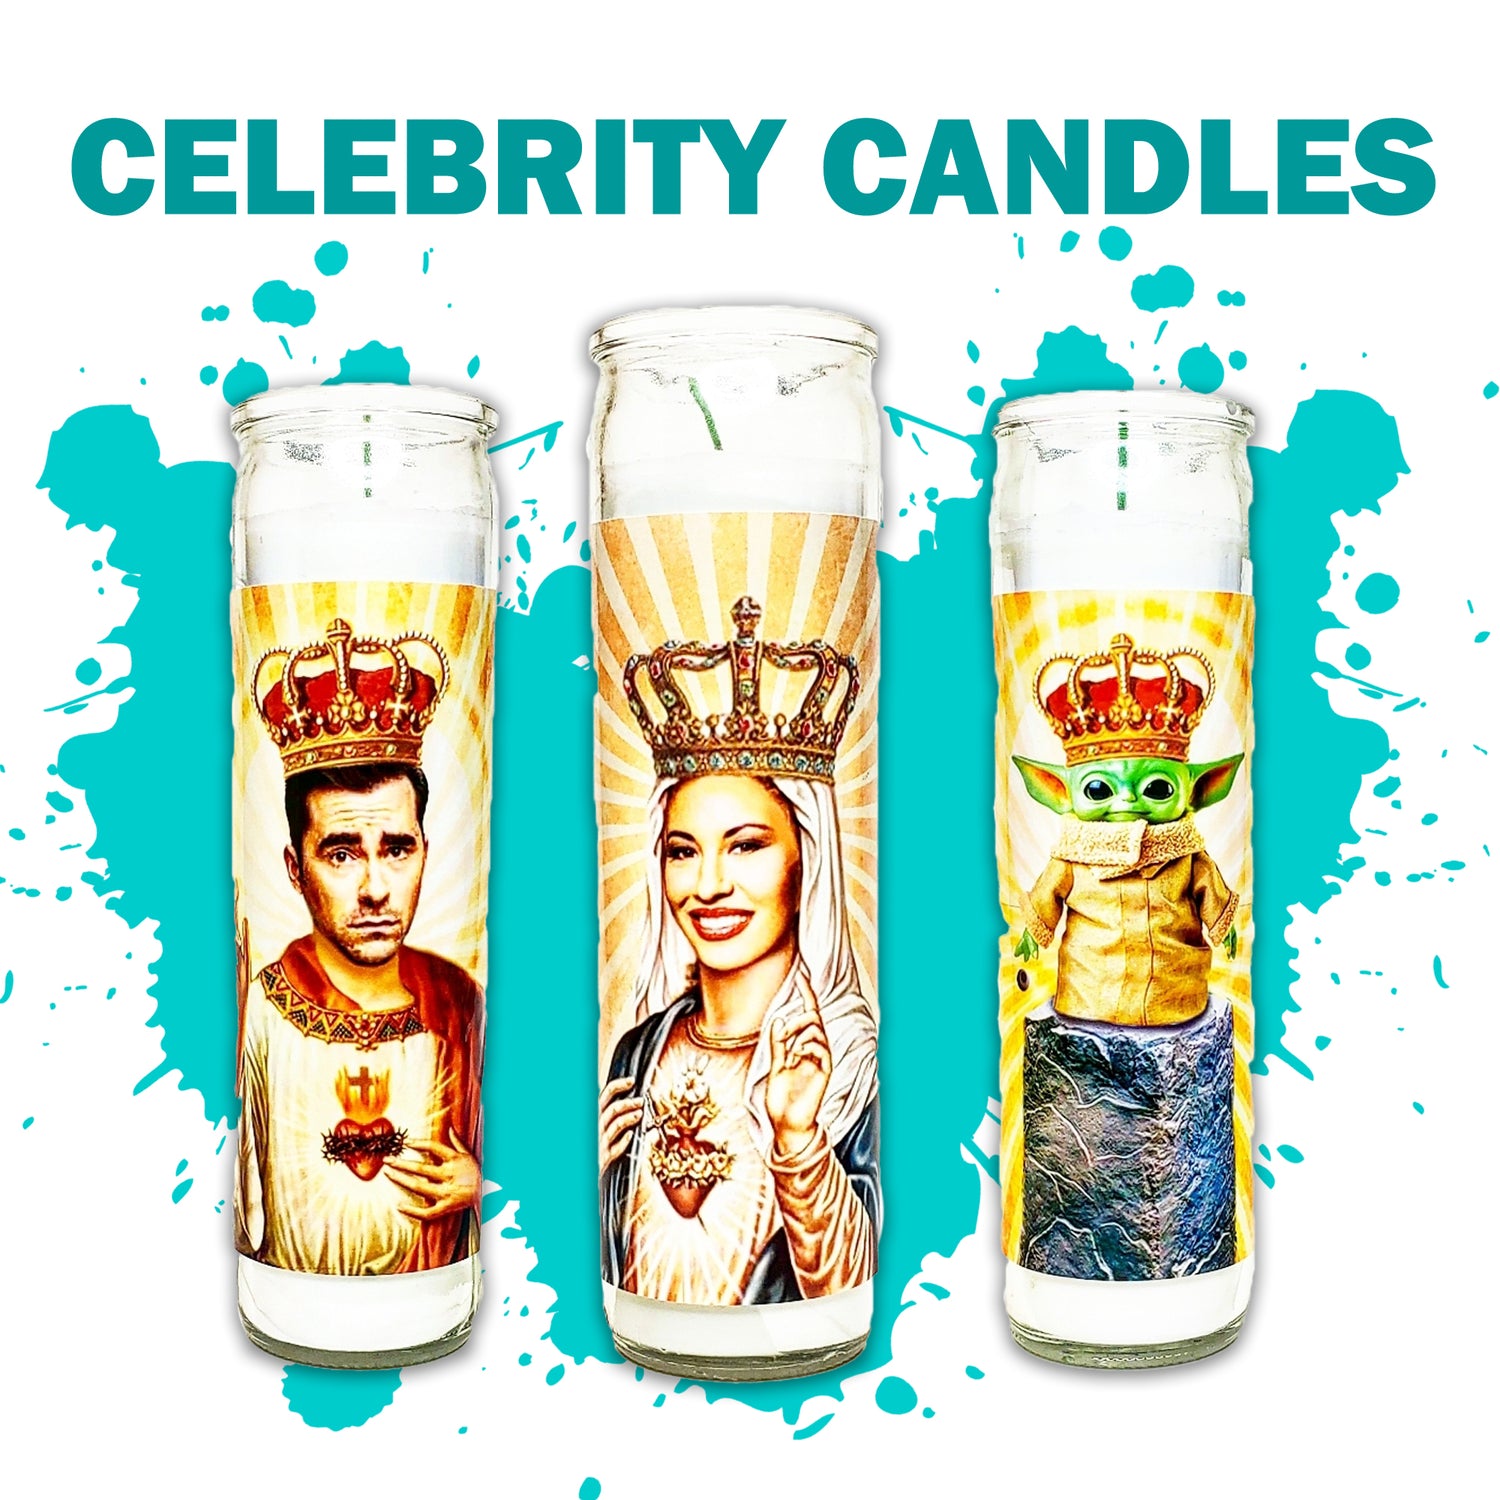 CELEBRITY CANDLES